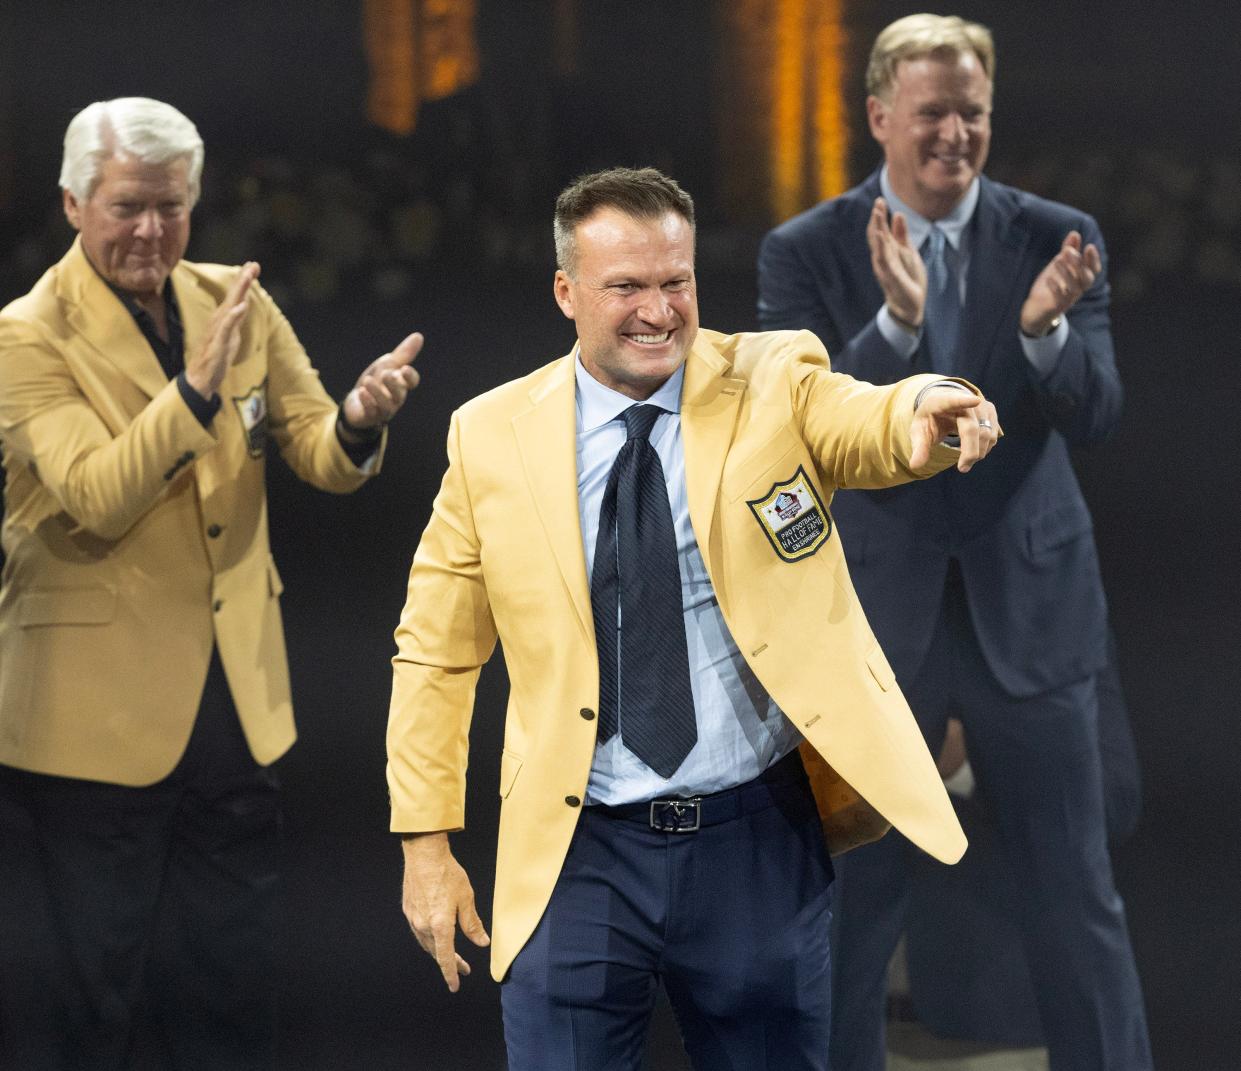 Zach Thomas celebrates after receiving his gold jacket from Hall of Famer Jimmie Johnson, left, and NFL Commissioner Roger Goodell on Friday in Canton.